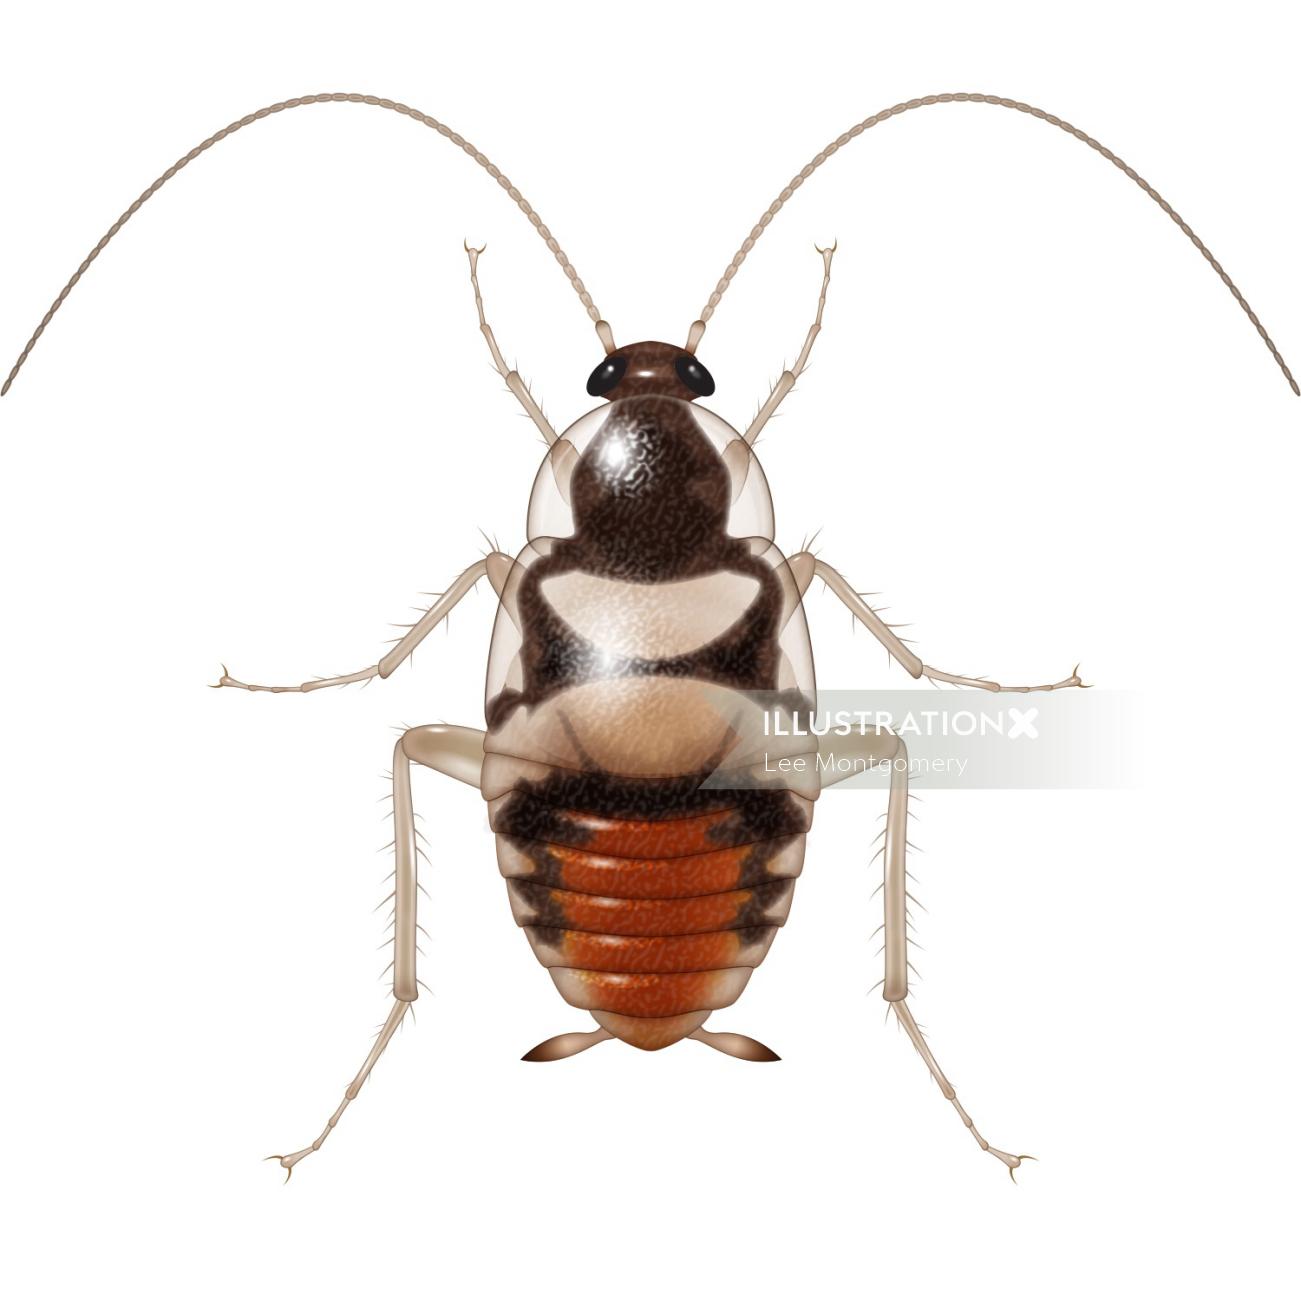 Illustration of young cockroach